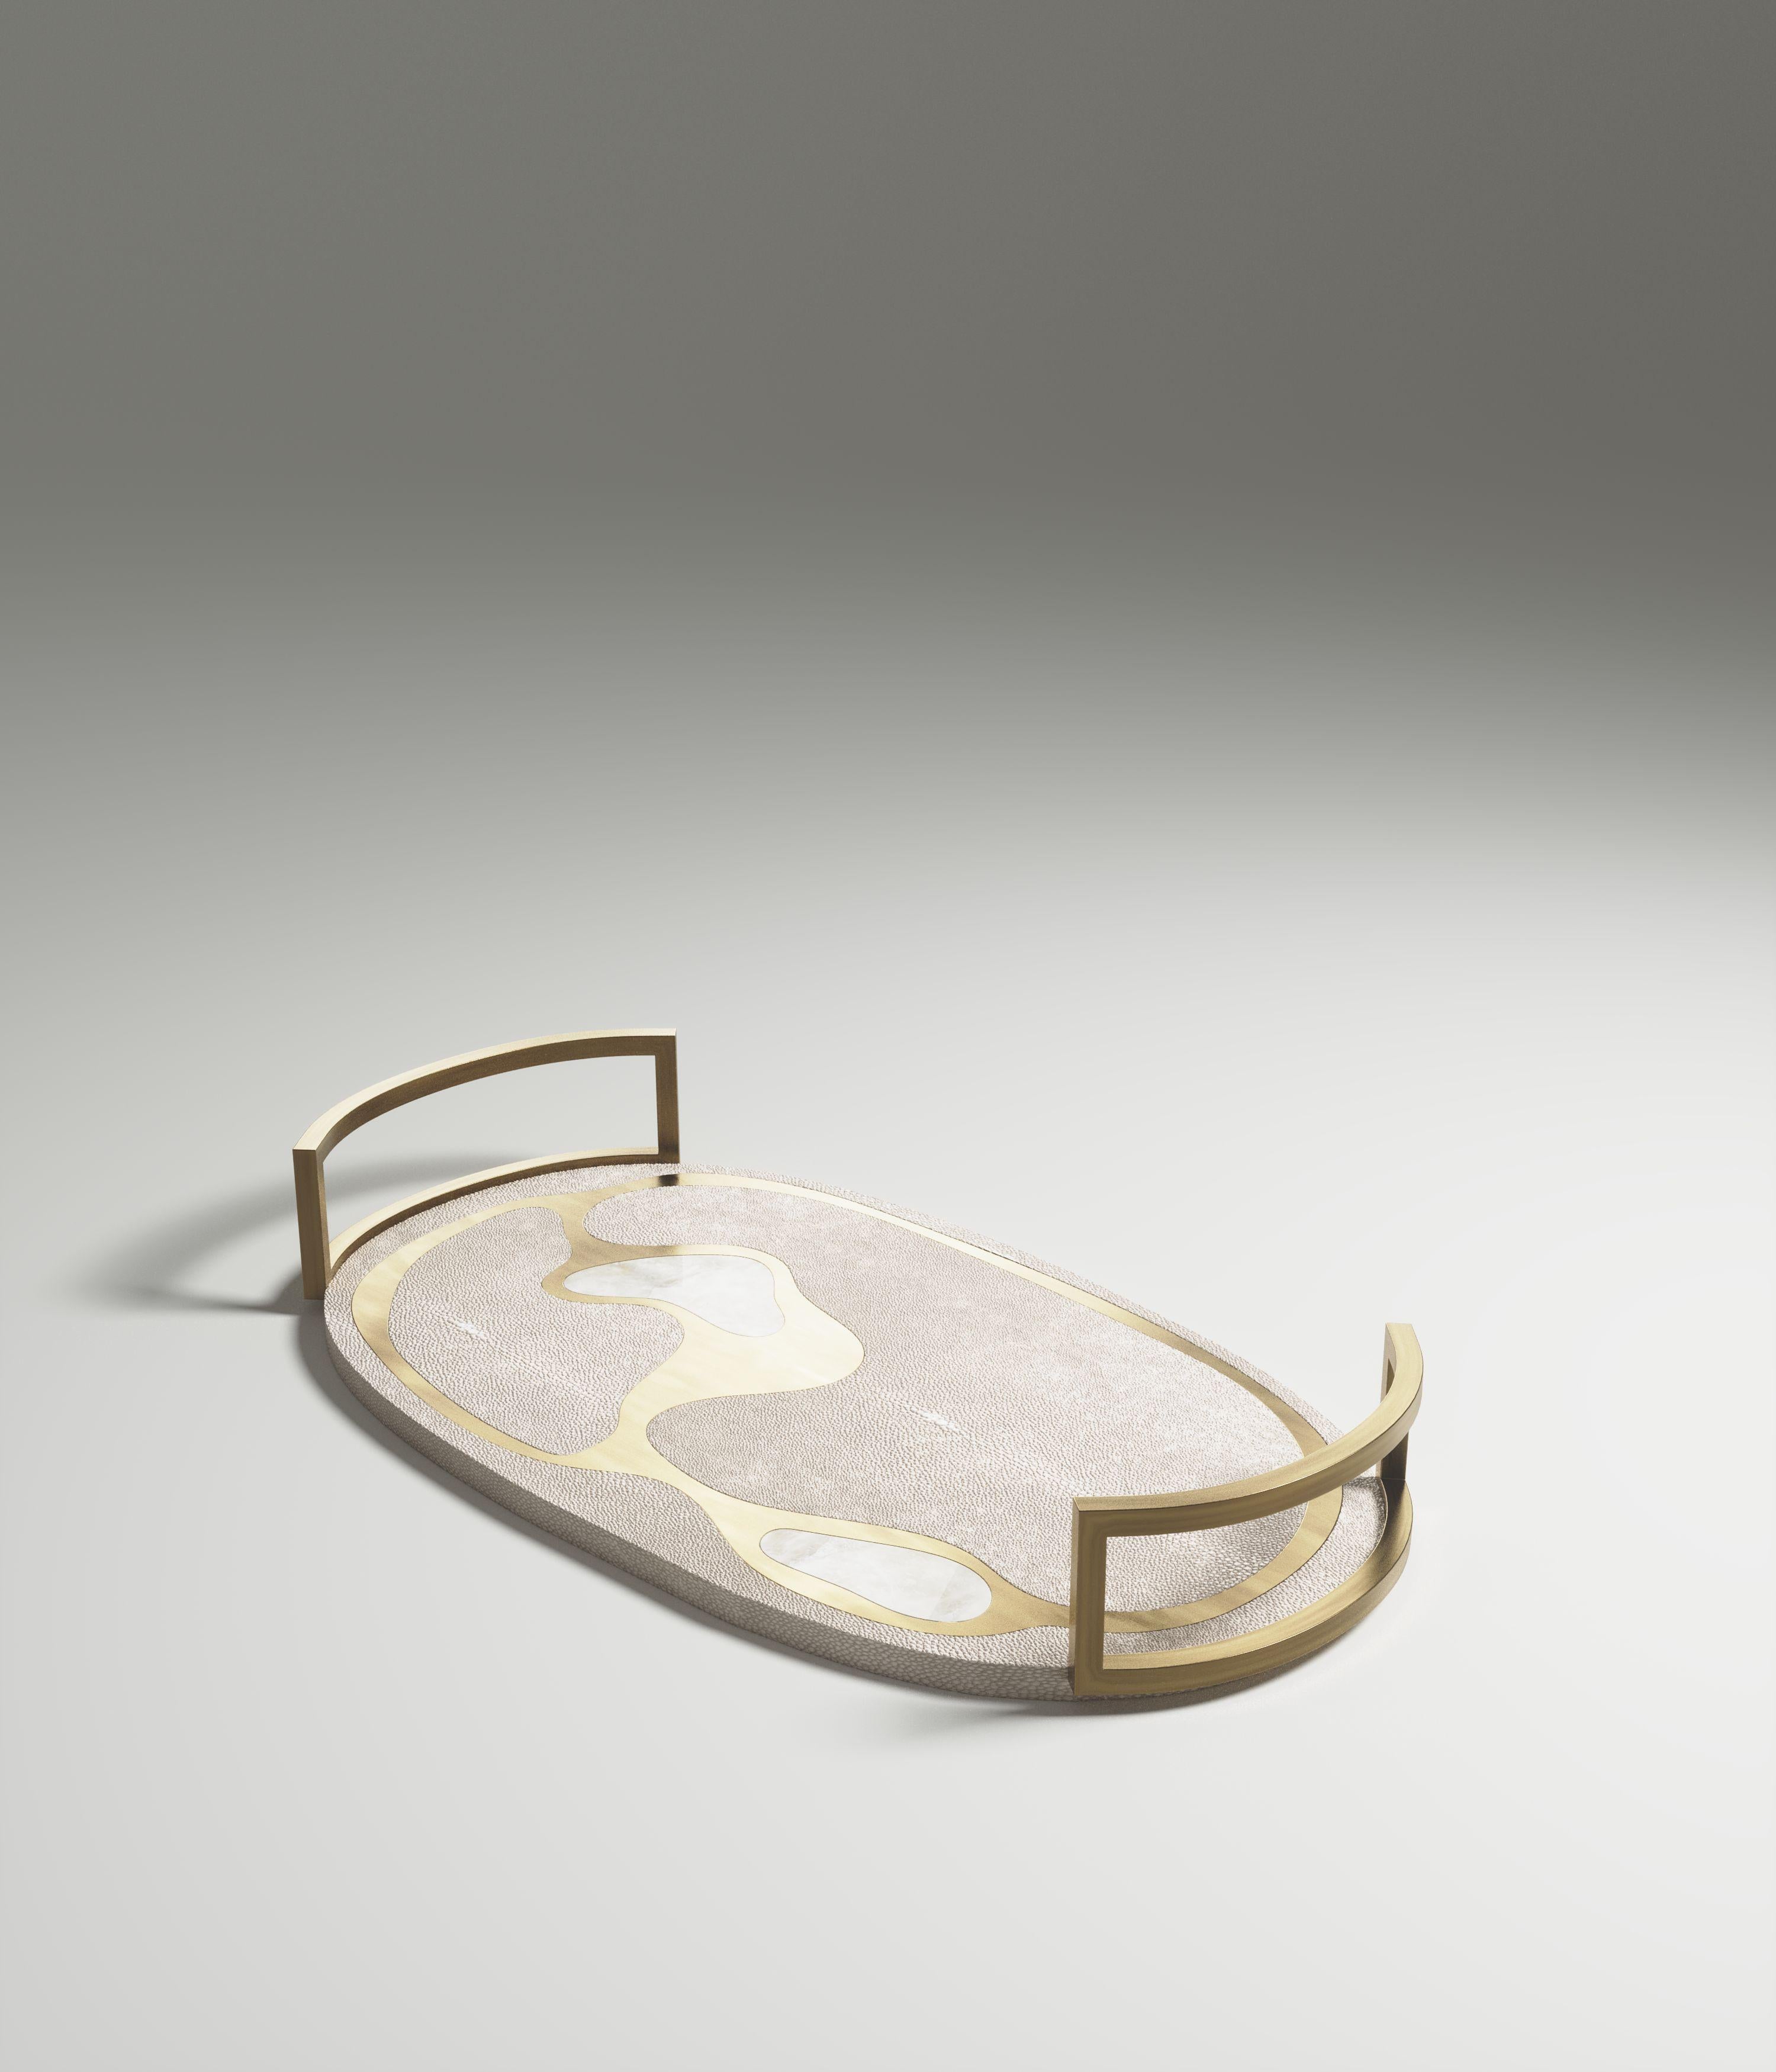 Art Deco Oval Tray in Cream Shagreen with Bronze-Patina Brass by Kifu Paris For Sale